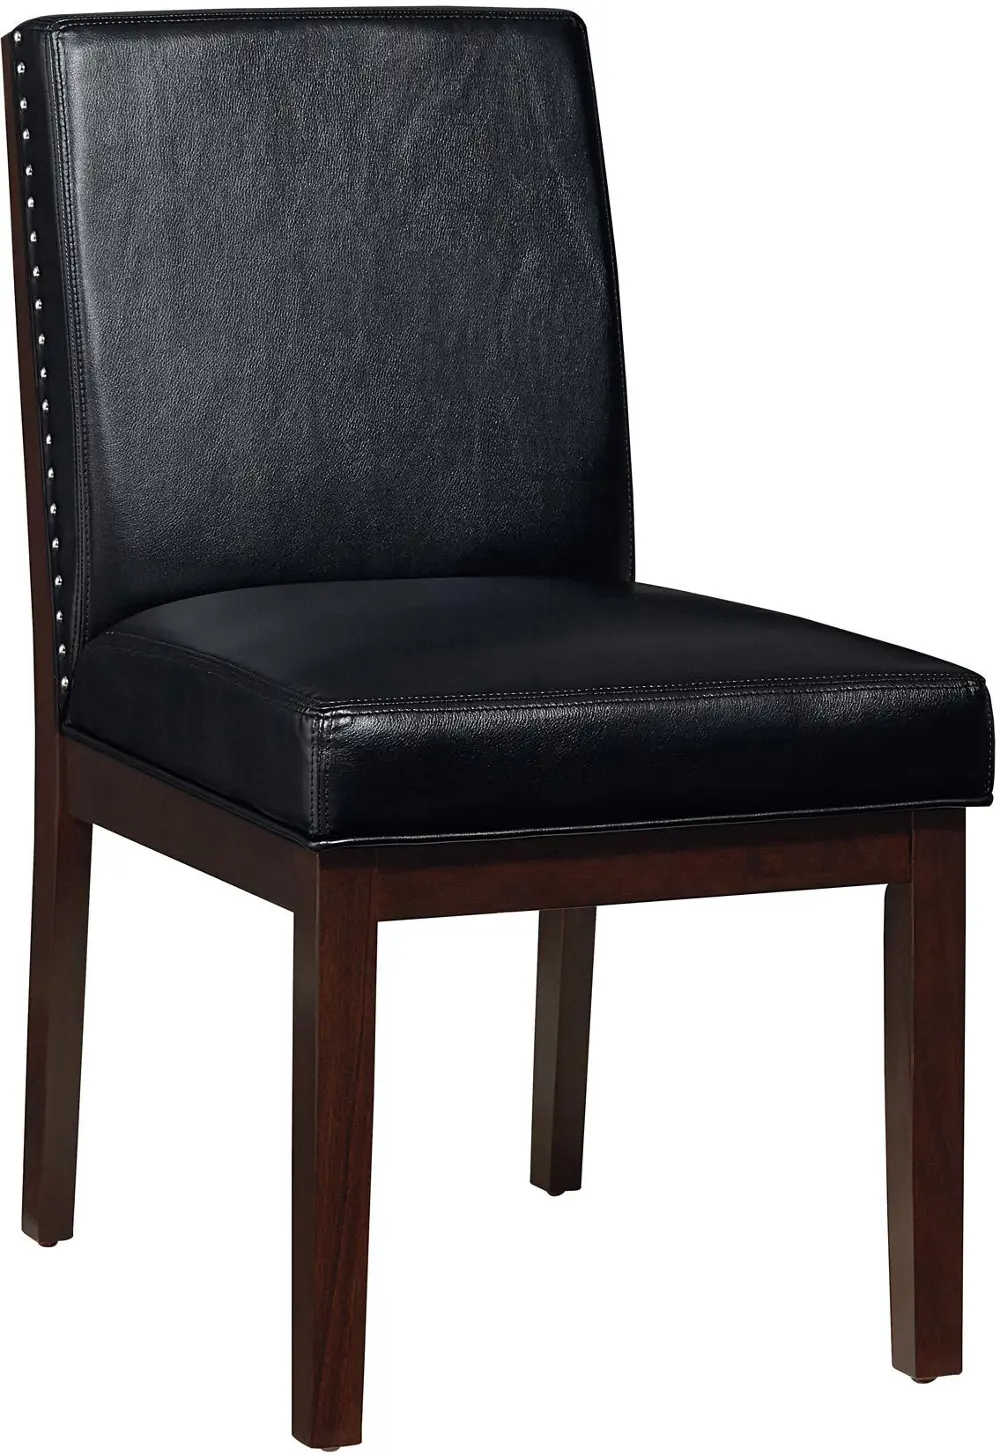 Black Upholstered Dining Room Chair - Couture Collection-1